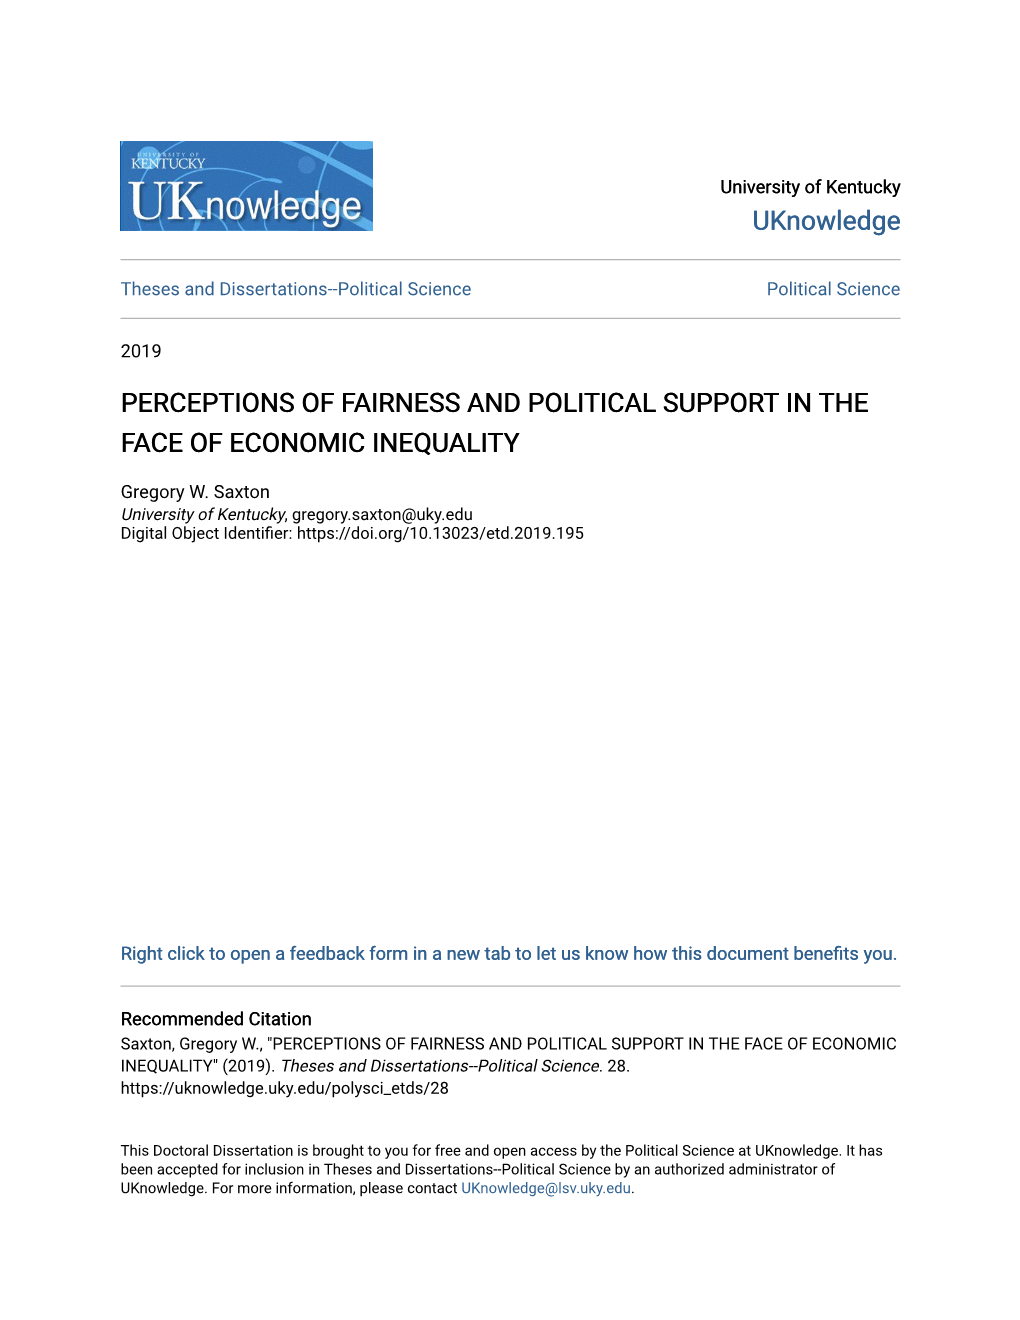 Perceptions of Fairness and Political Support in the Face of Economic Inequality